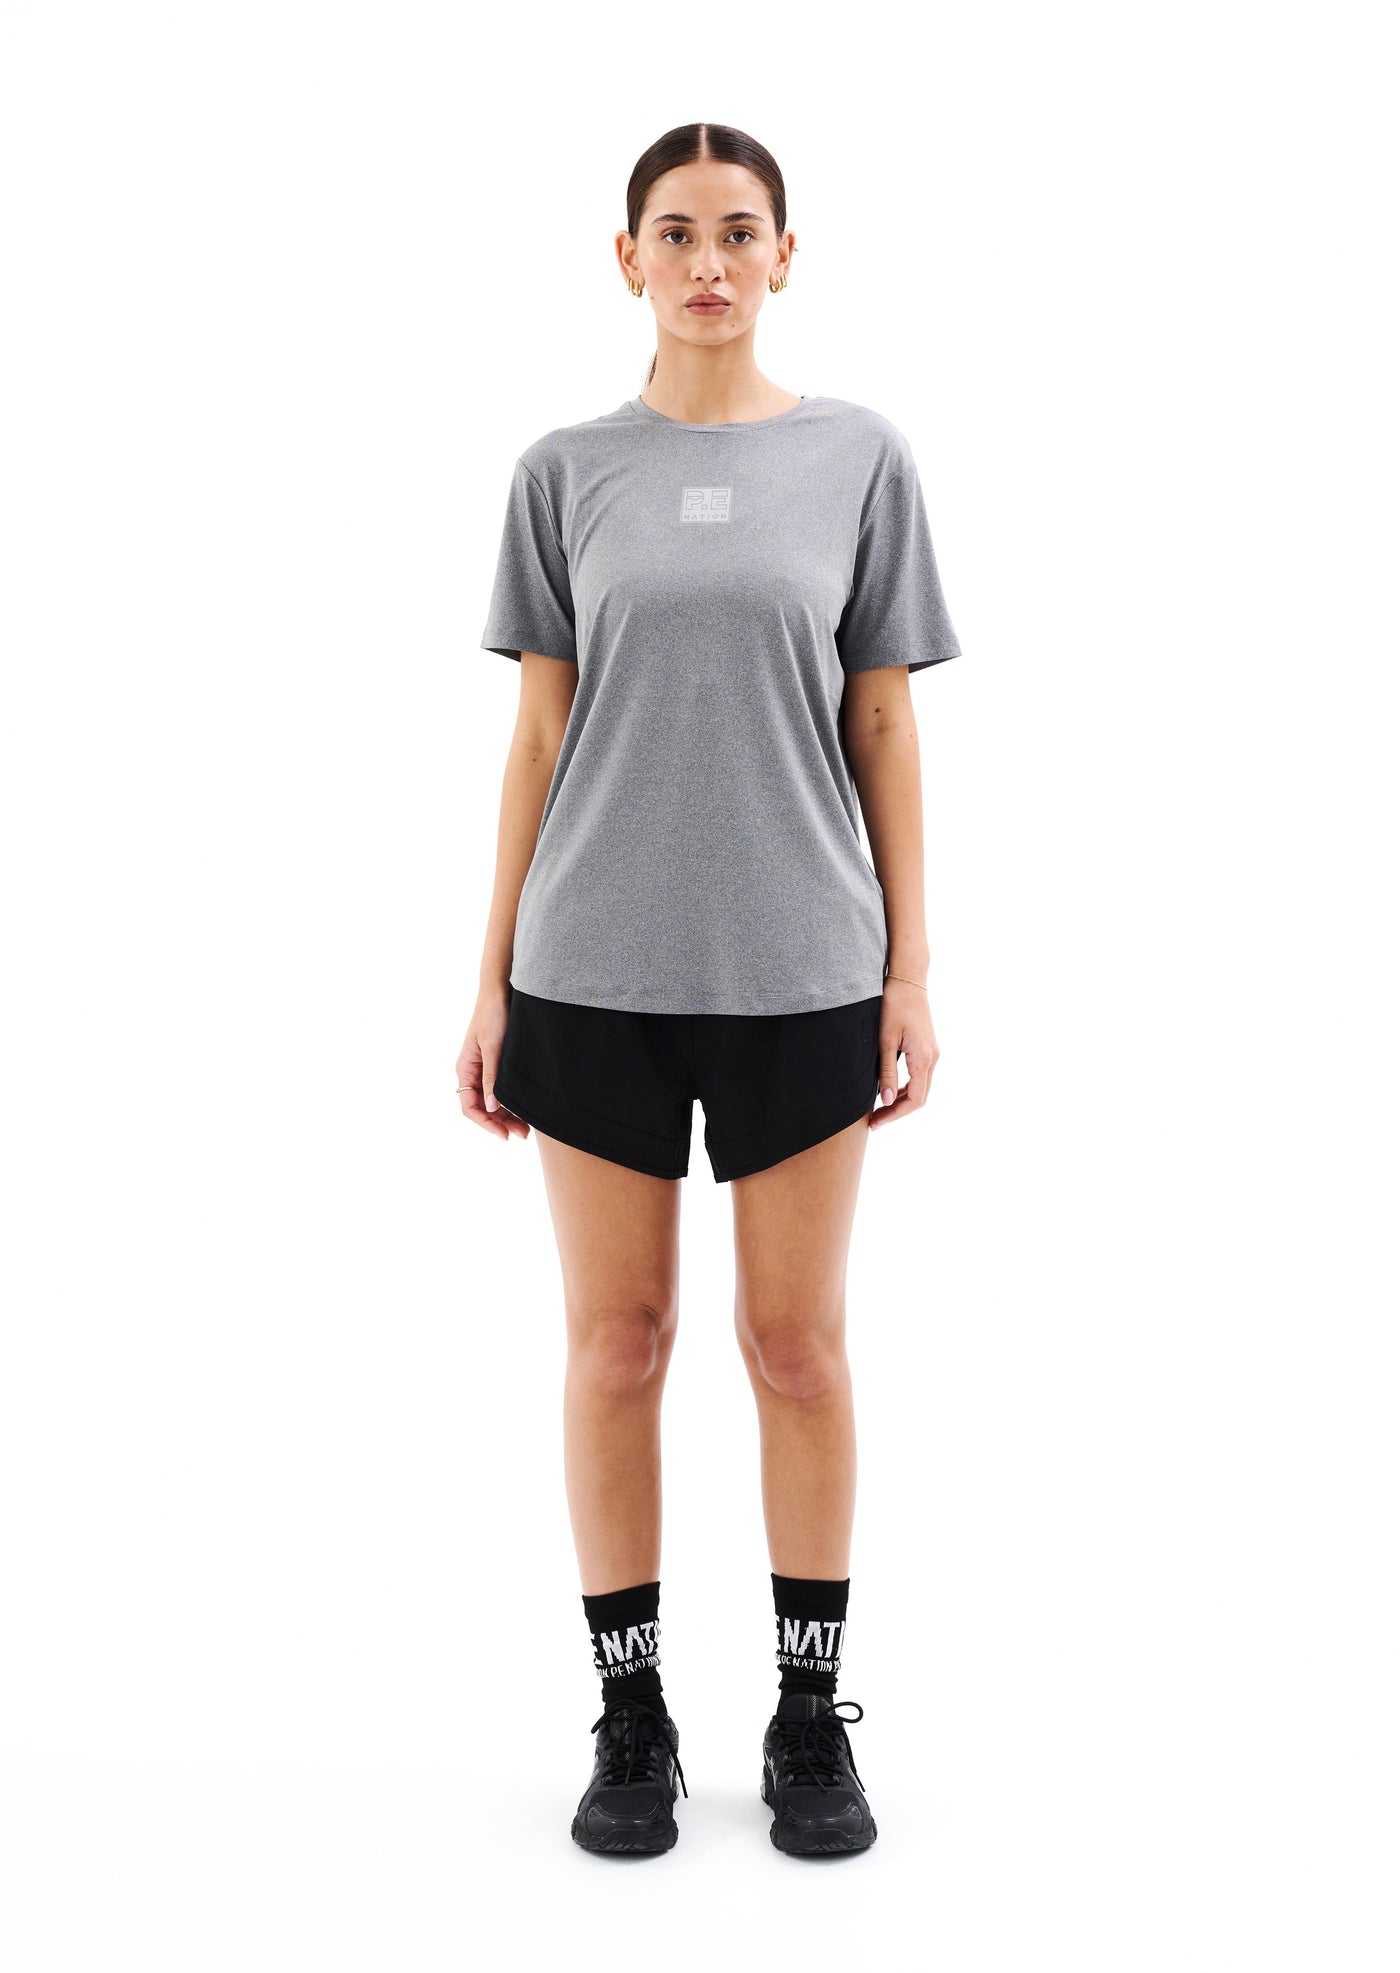 CROSSOVER MARLE AIR FORM TEE IN GREY MARLE